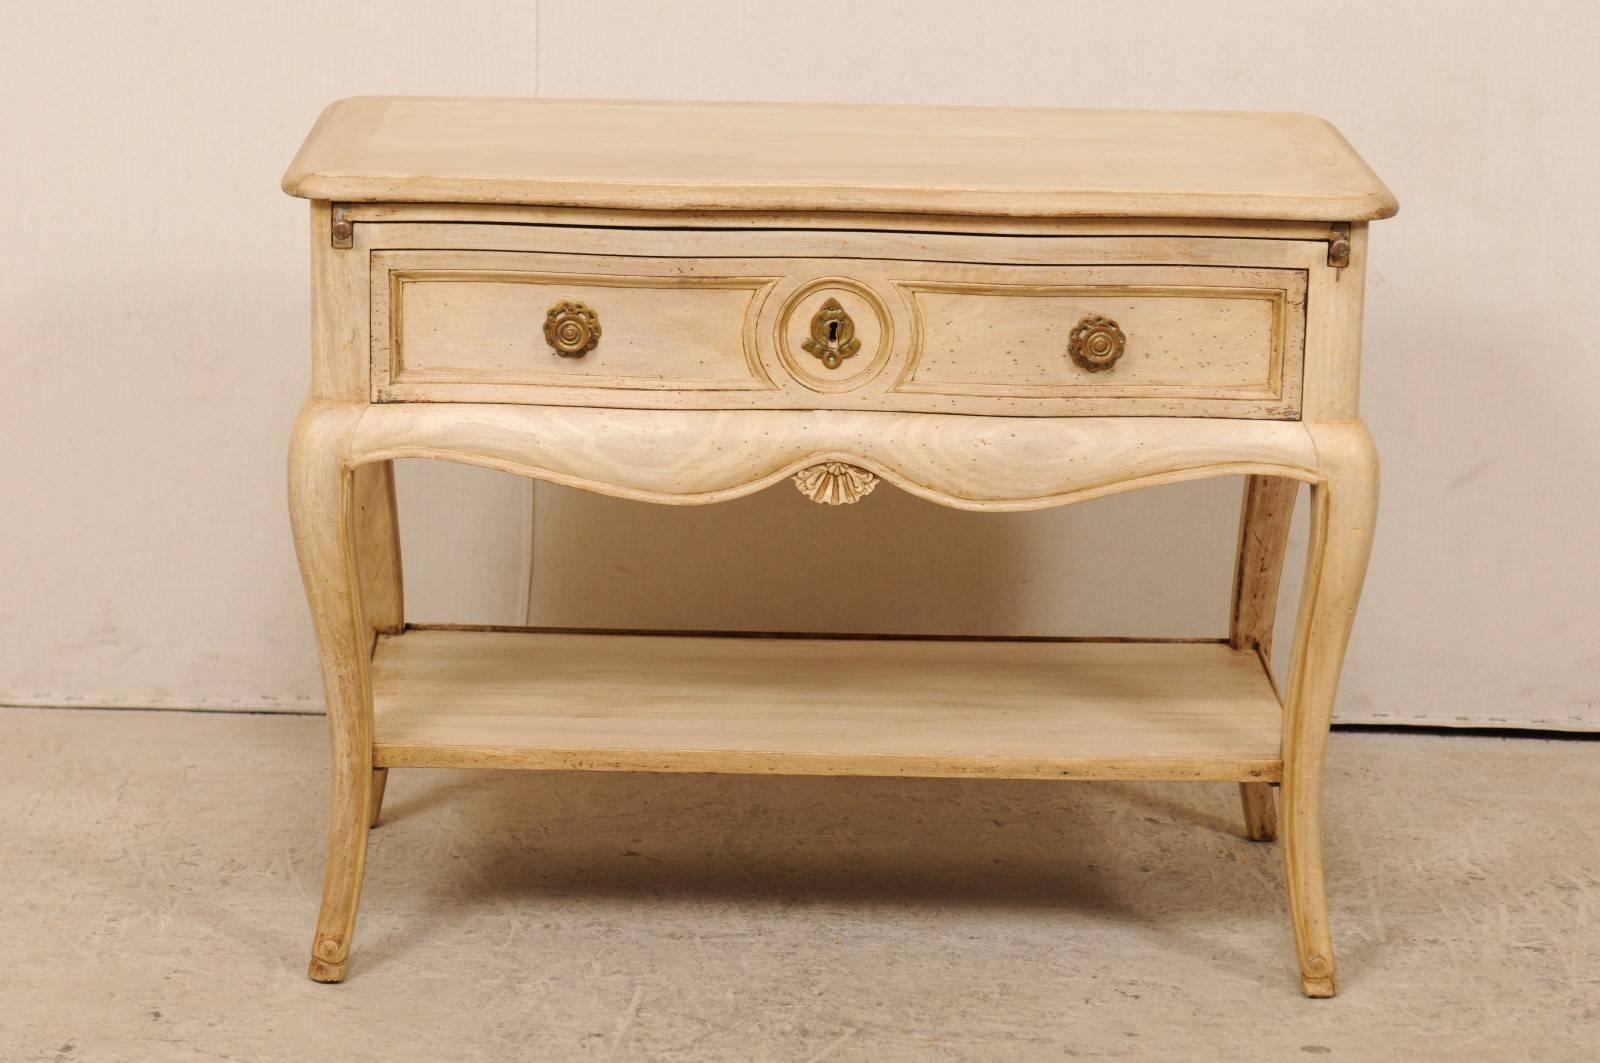 An American single-drawer chest with lower shelf from the mid-20th century. This American mid-century chest or table features a beautiful bleached wood finish, scalloped skirt on all four sides, and is raised upon four elegant cabriole legs. There